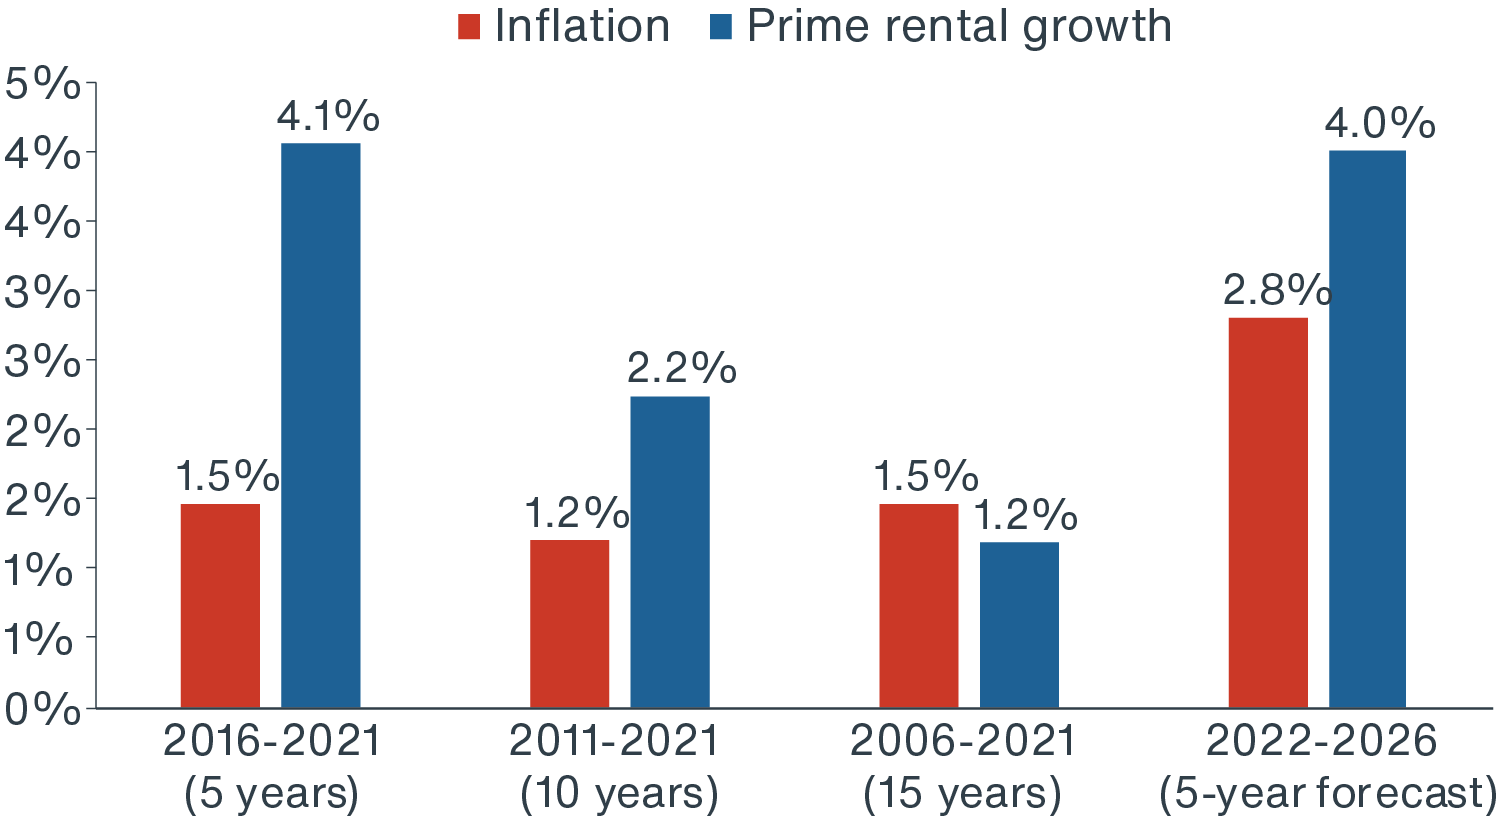 Average prime rental growth has comfortably outpaced inflation over the last 5 & 10 years and is expected to continue 2022-2026